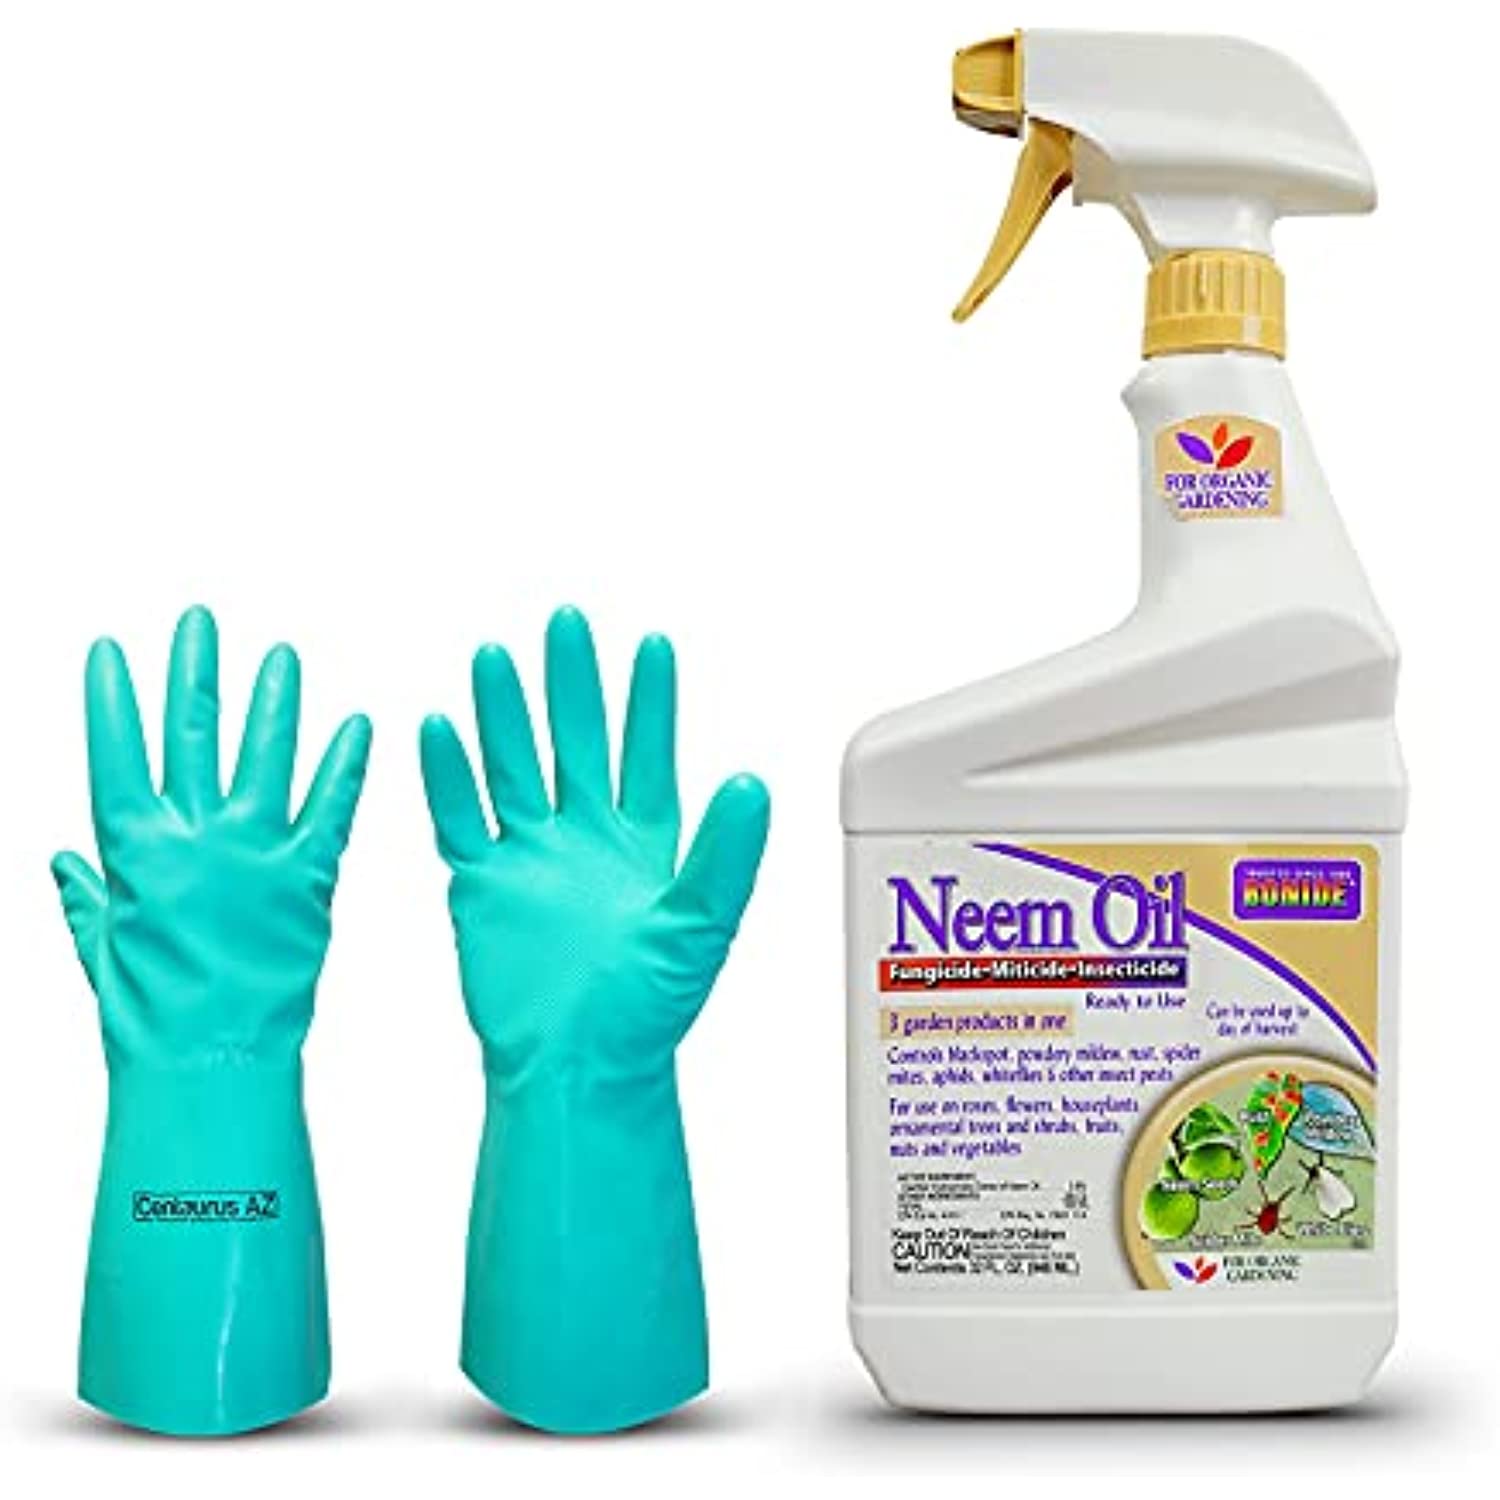 Organic Pet Safe Insect Killer - Bonide Neem Oil 1-Quart, Insect/Disease Control Kills All Stages of Insects, Ready-to-Spray Insecticide, Fungicide & Miticide, Bundled with Centaurus AZ Gloves